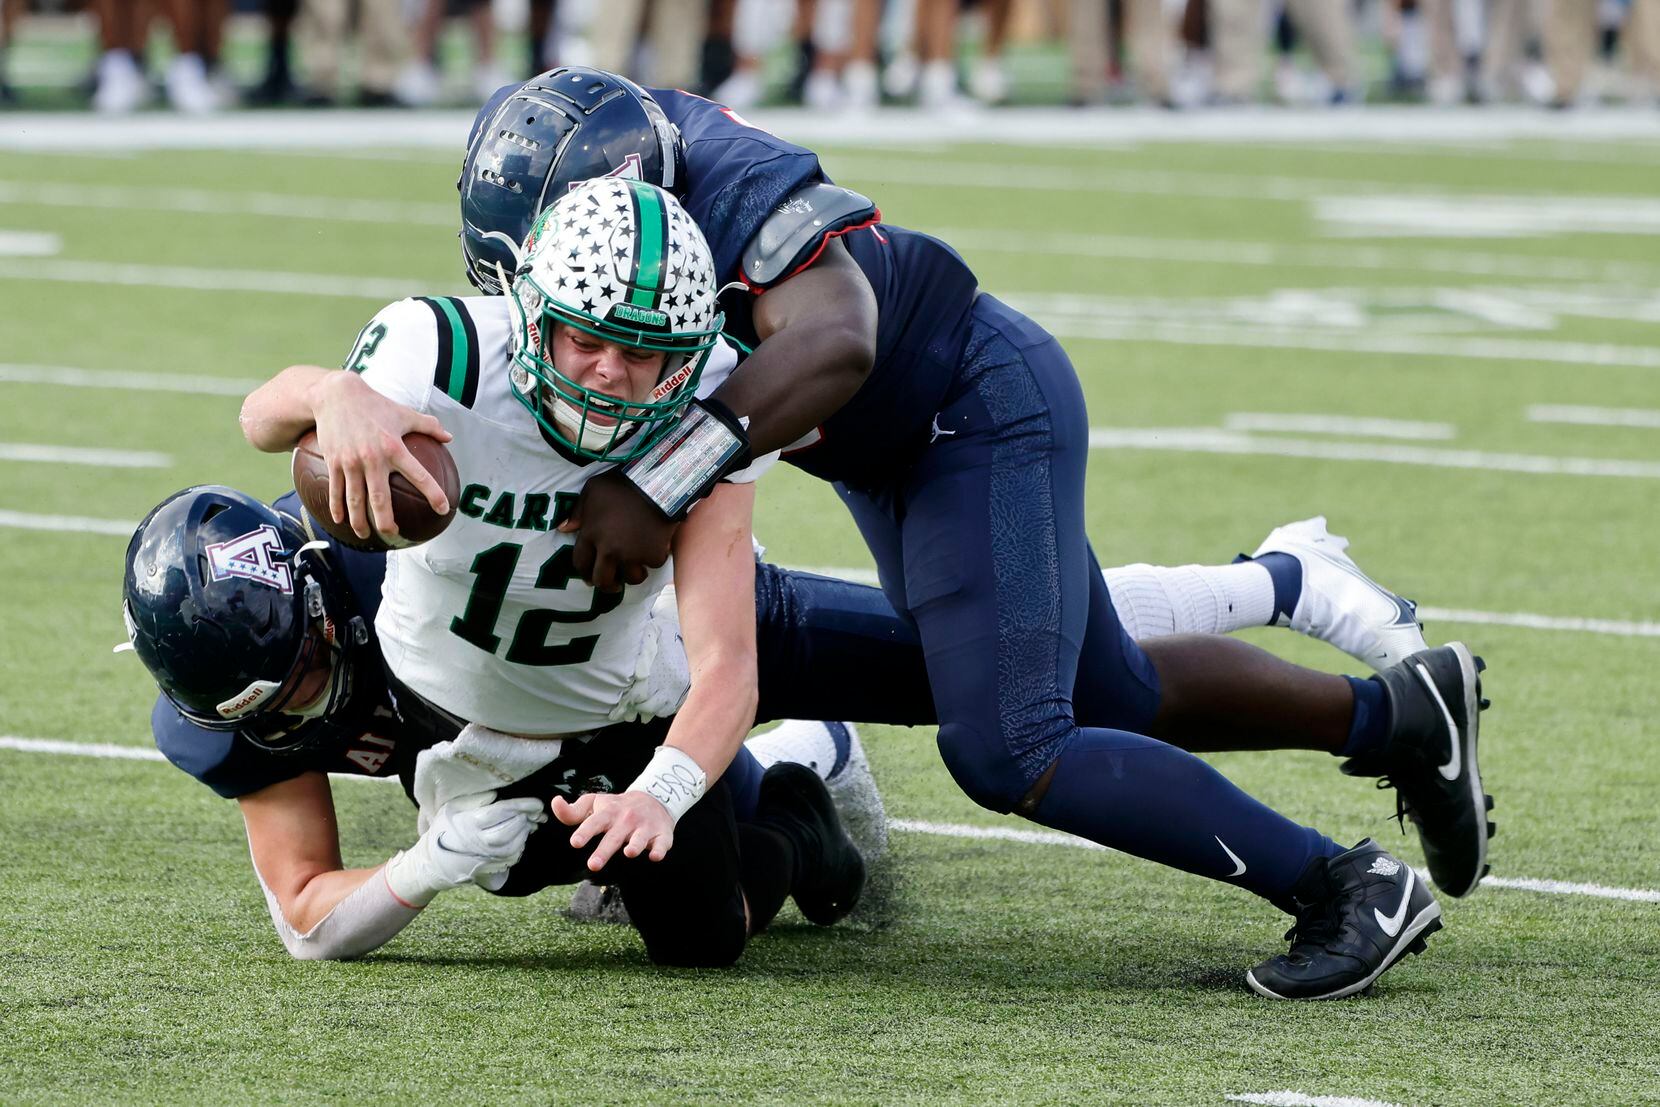 Allen’s Aidan Graham, left, and DJ Hicks, top, tackle Southlake quarterback Kaden Anderson (12) during the first half of a Class 6A Division I Region I final high school football game in Denton, Texas on Saturday, Dec. 4, 2021. (Michael Ainsworth/Special Contributor)